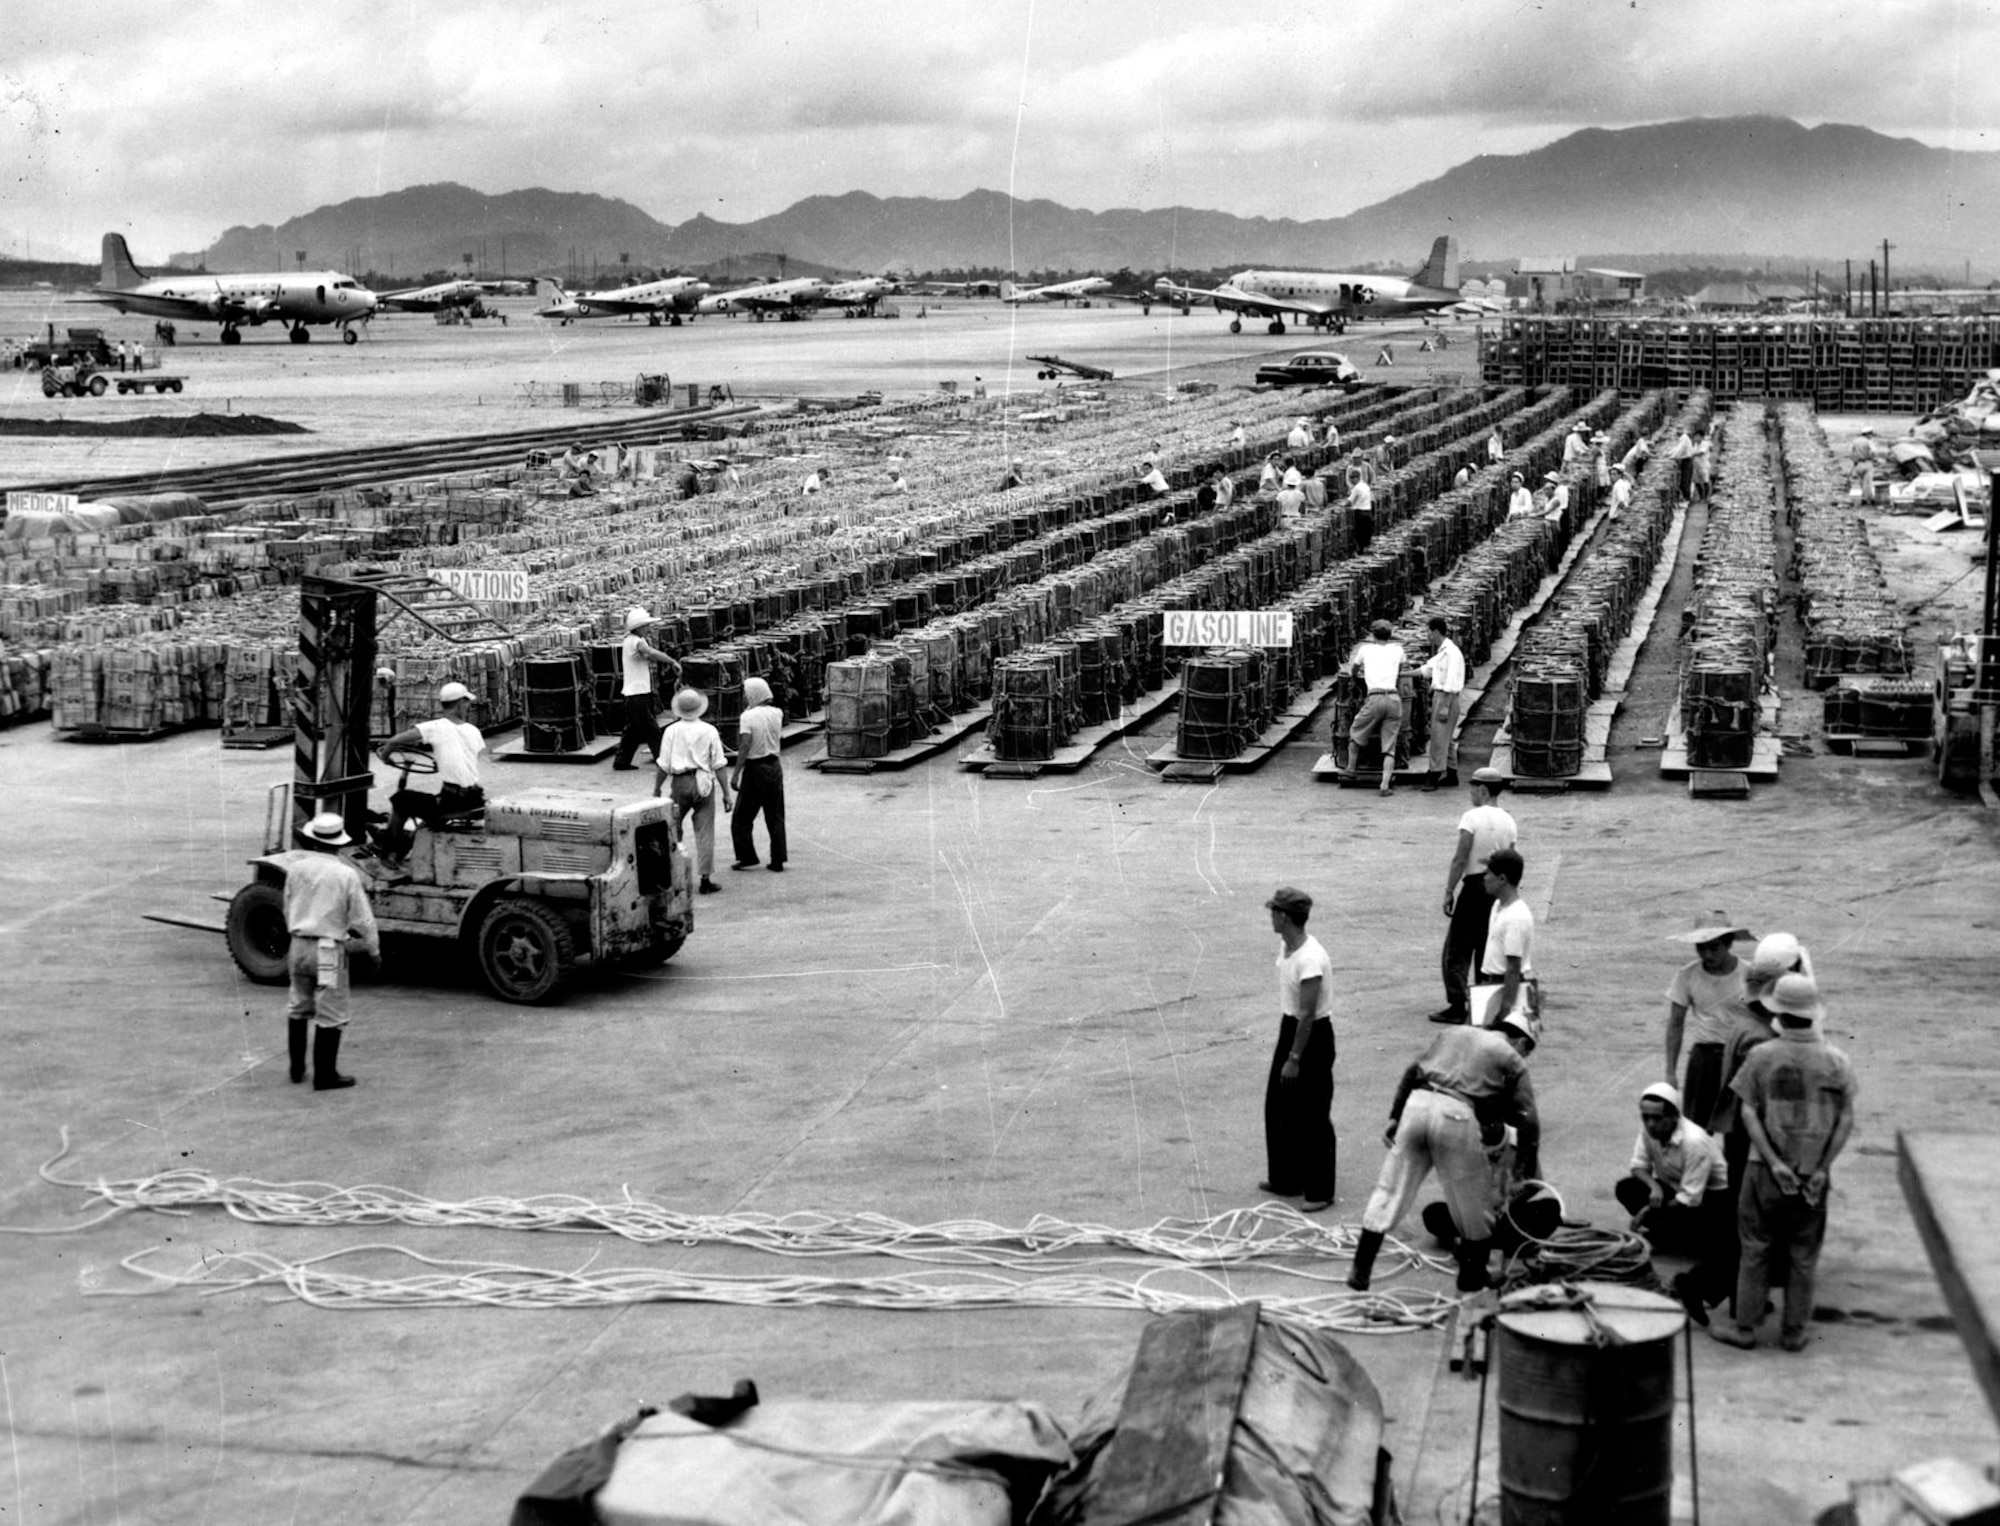 Supplies stand ready at an air base in Japan. This food and fuel will be loaded onto C-119s and dropped to front-line forces. (U.S. Air Force photo)